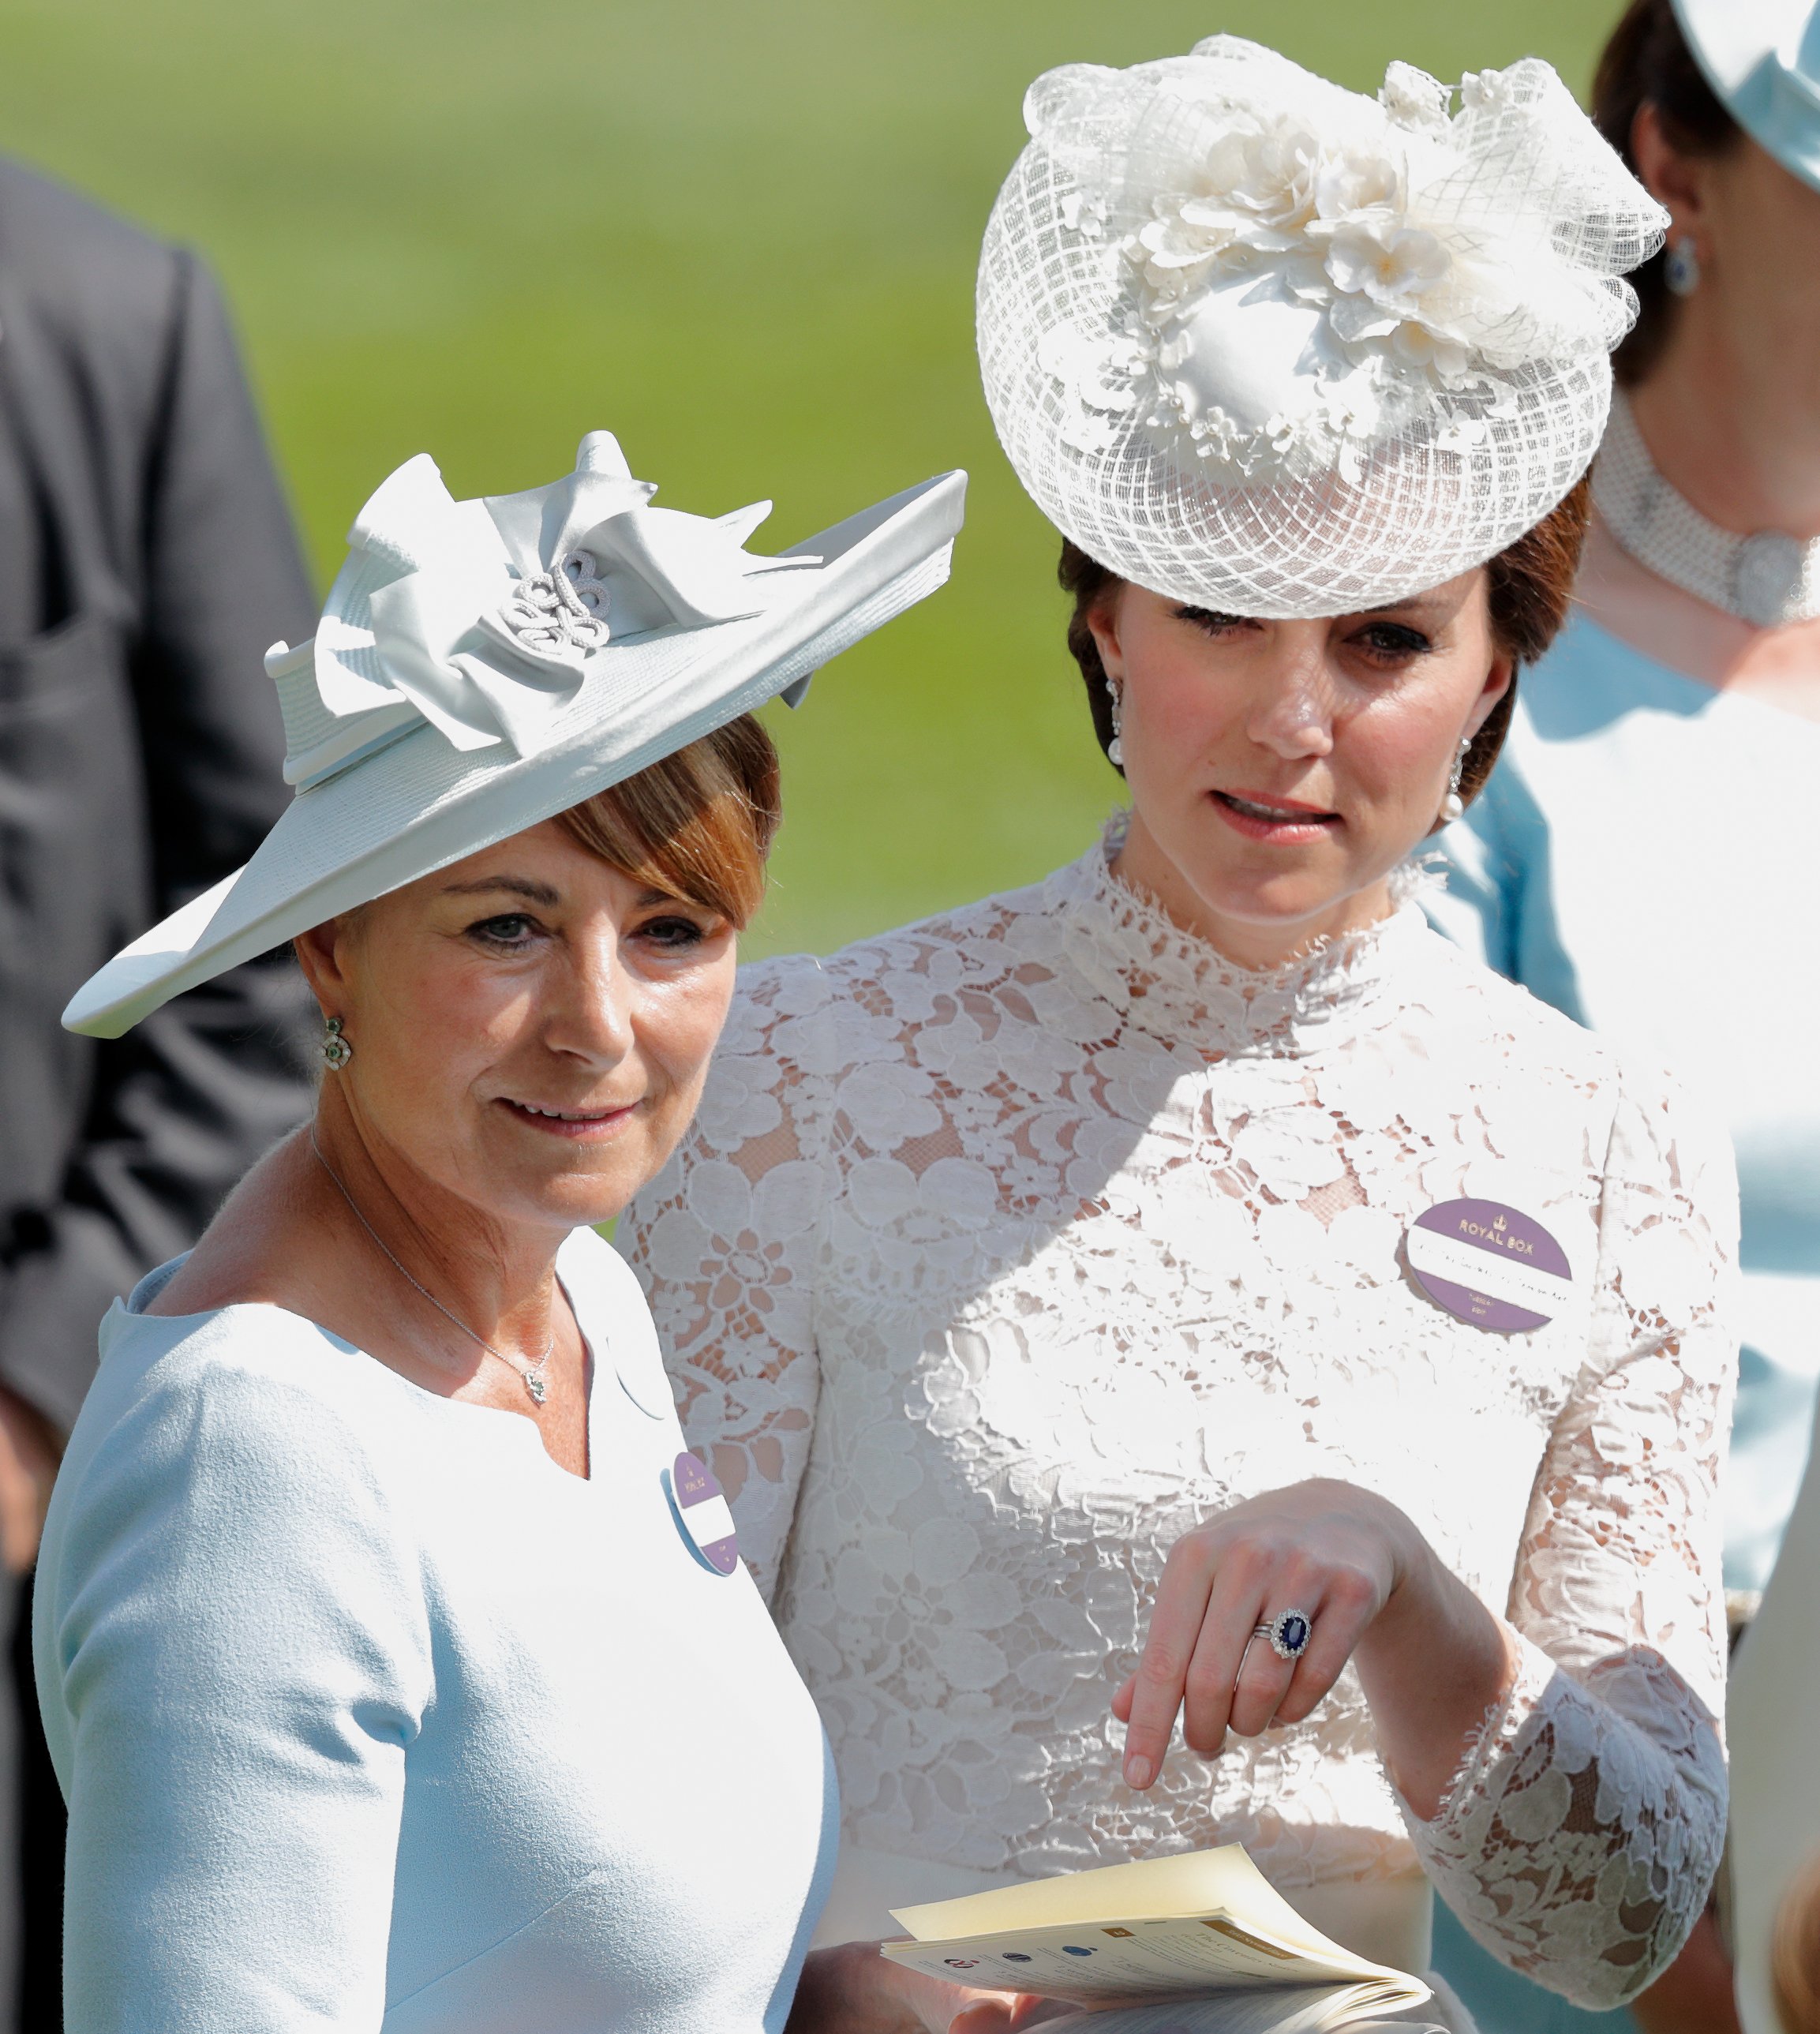 Kate Middleton and her mother Carole Middleton during day 1 of Royal Ascot at Ascot Racecourse on June 20, 2017 in Ascot, England. / Source: Getty Images